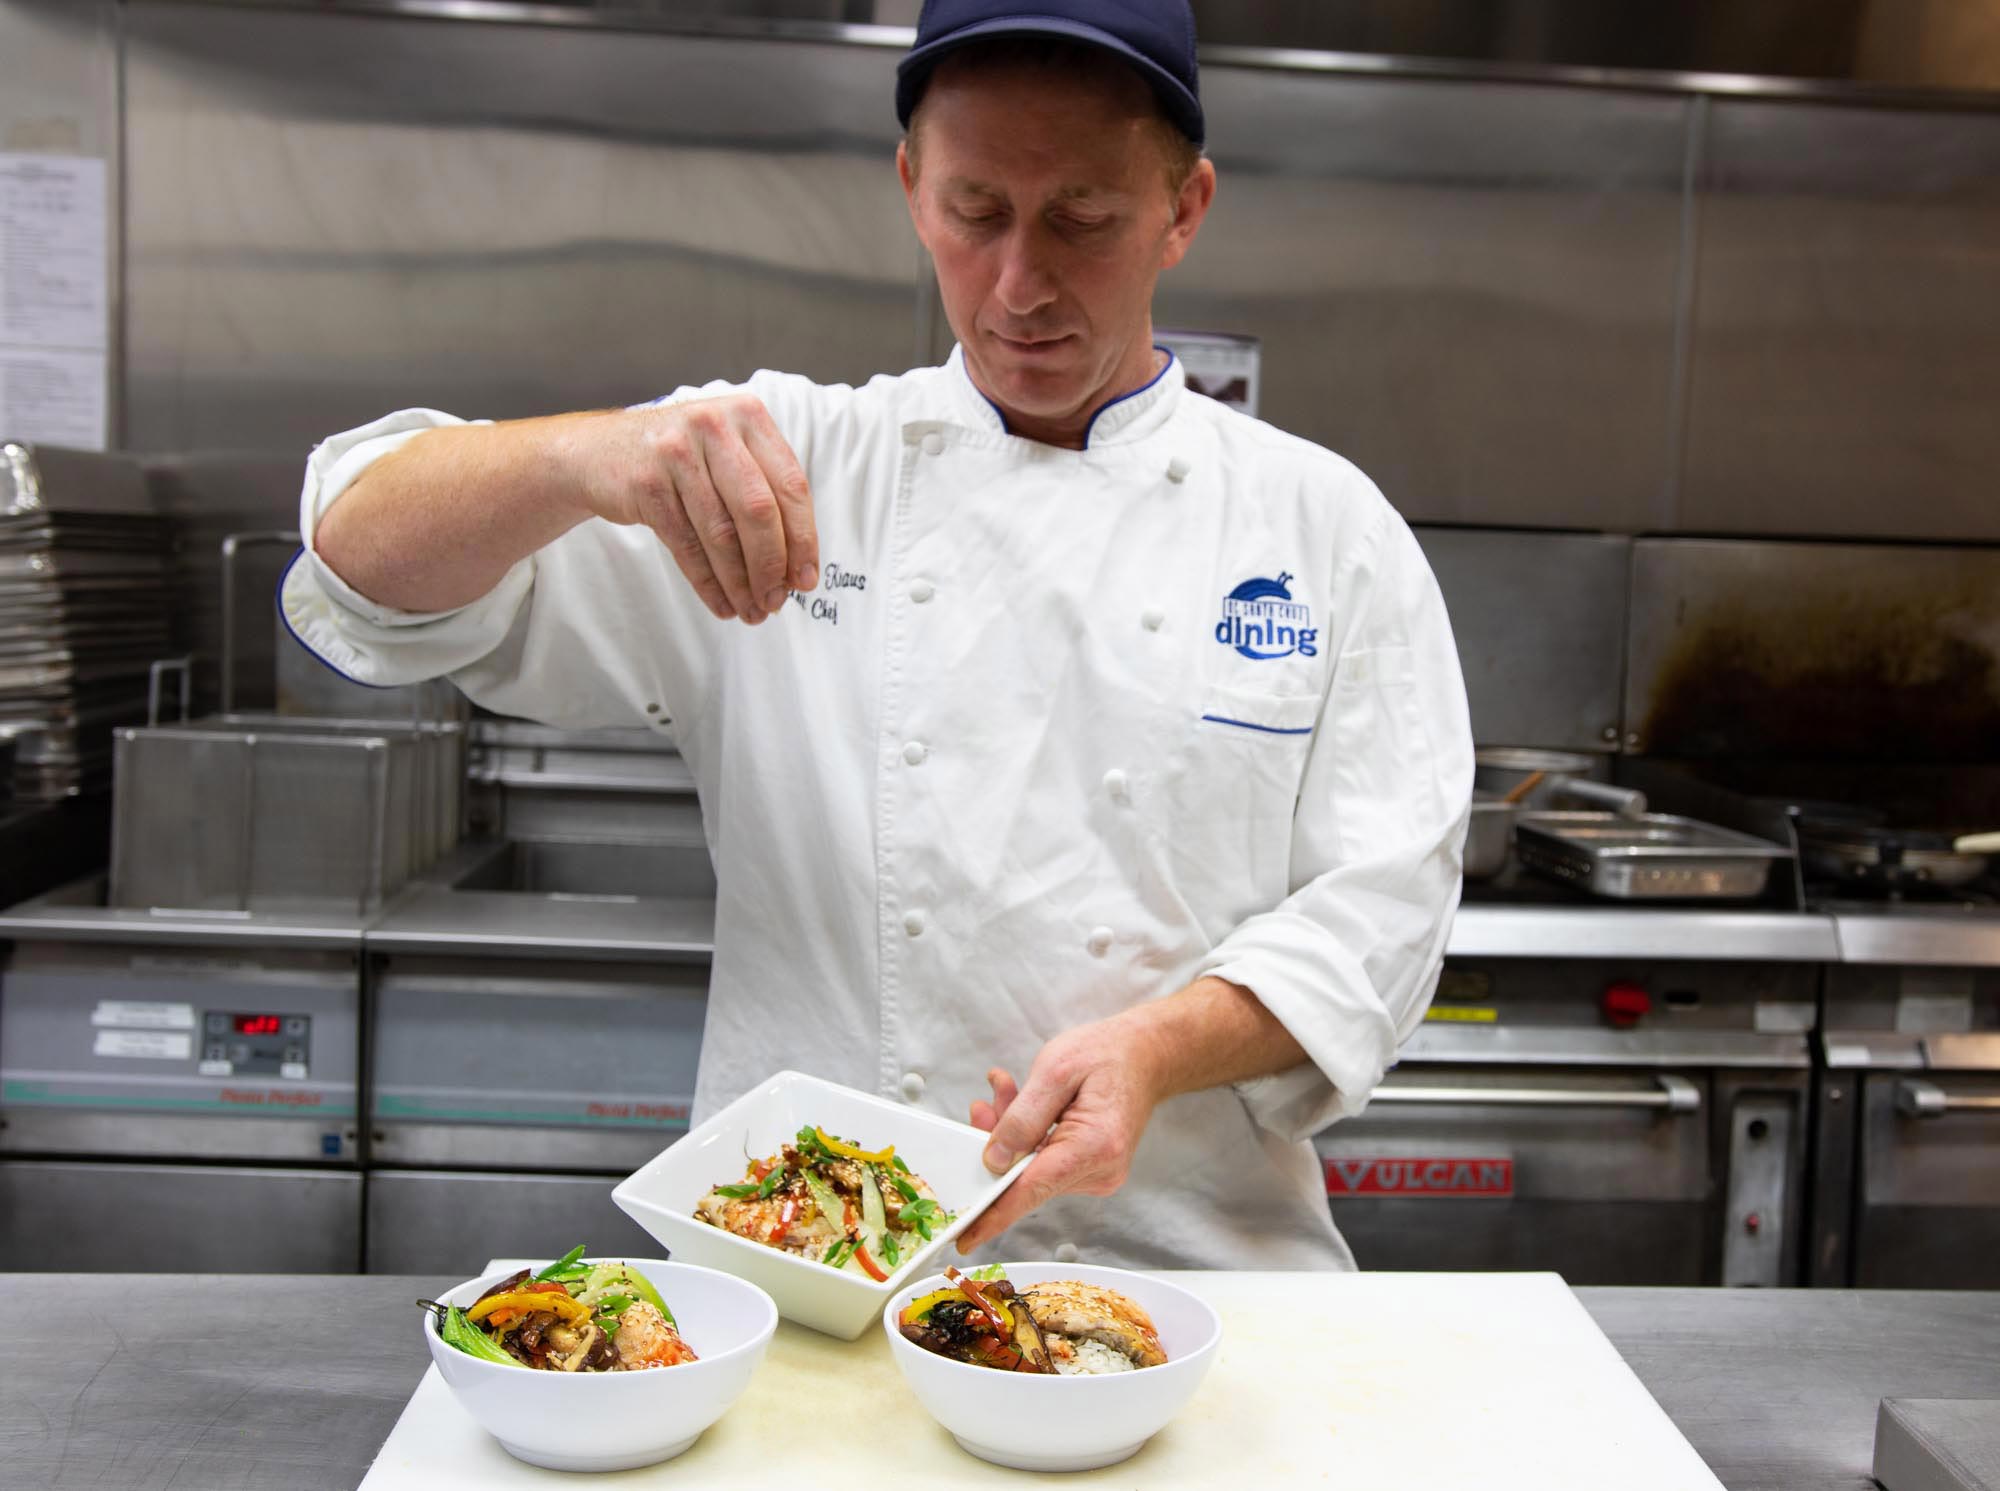 UCSC Dining chef adds the finishing touch on a dish